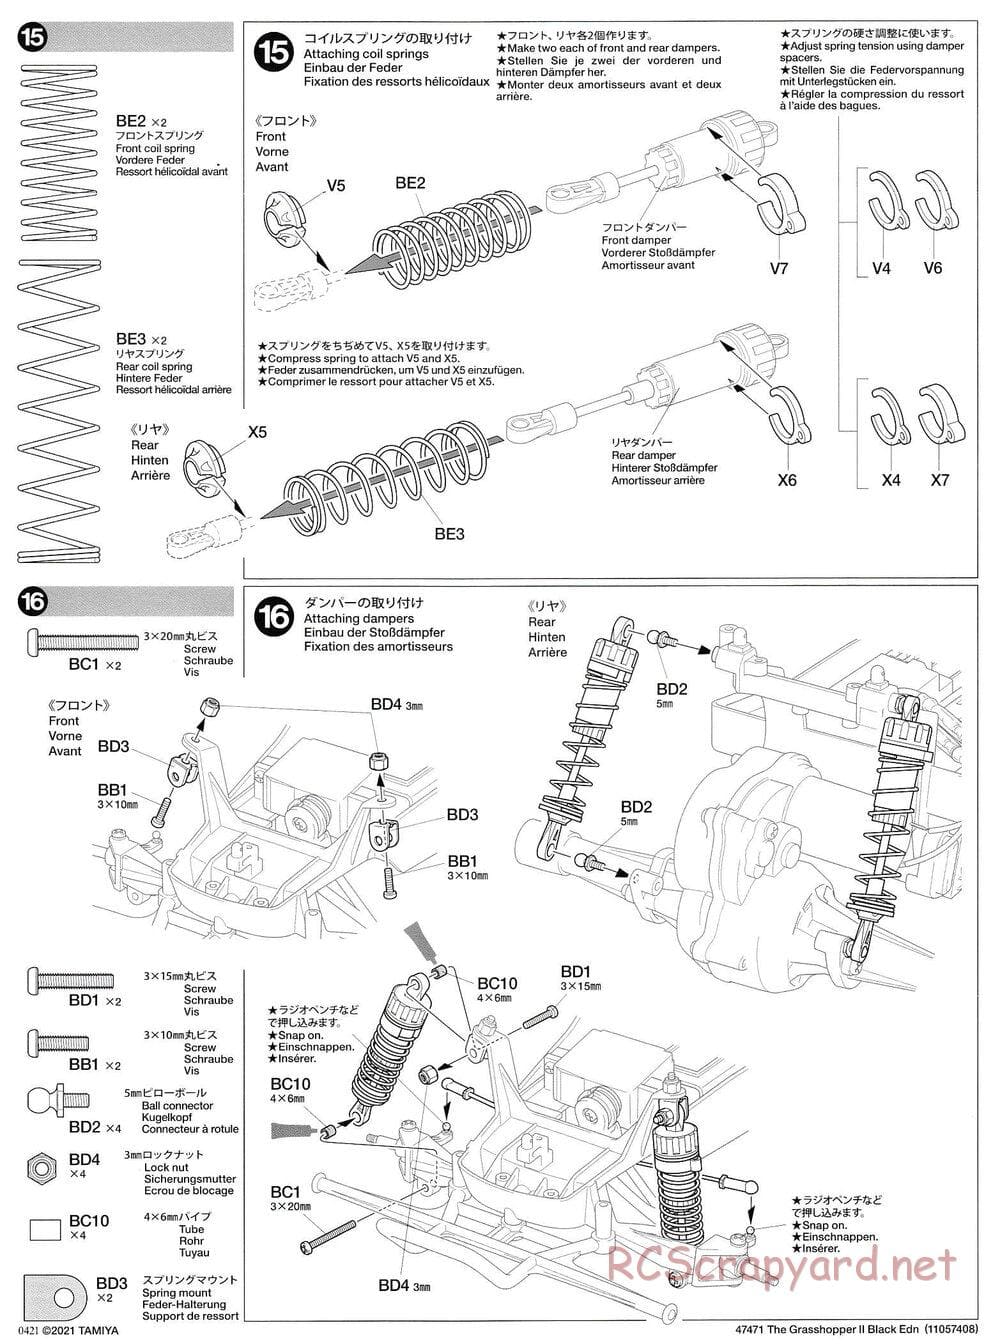 Tamiya - The Grasshopper II Black Edition Chassis - Manual - Page 3